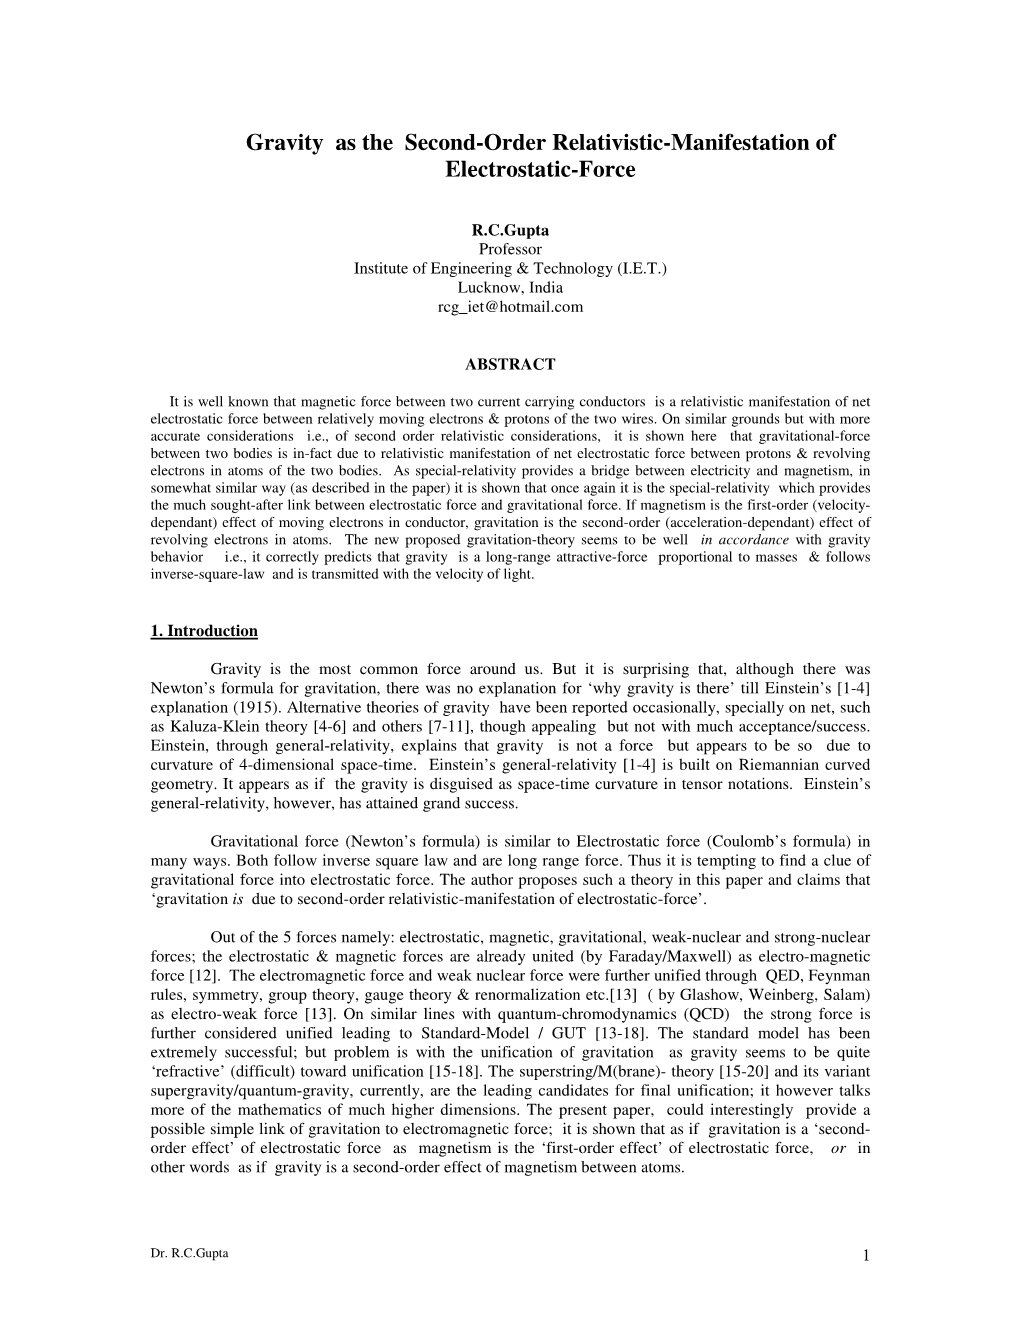 Gravity As the Second-Order Relativistic-Manifestation of Electrostatic-Force